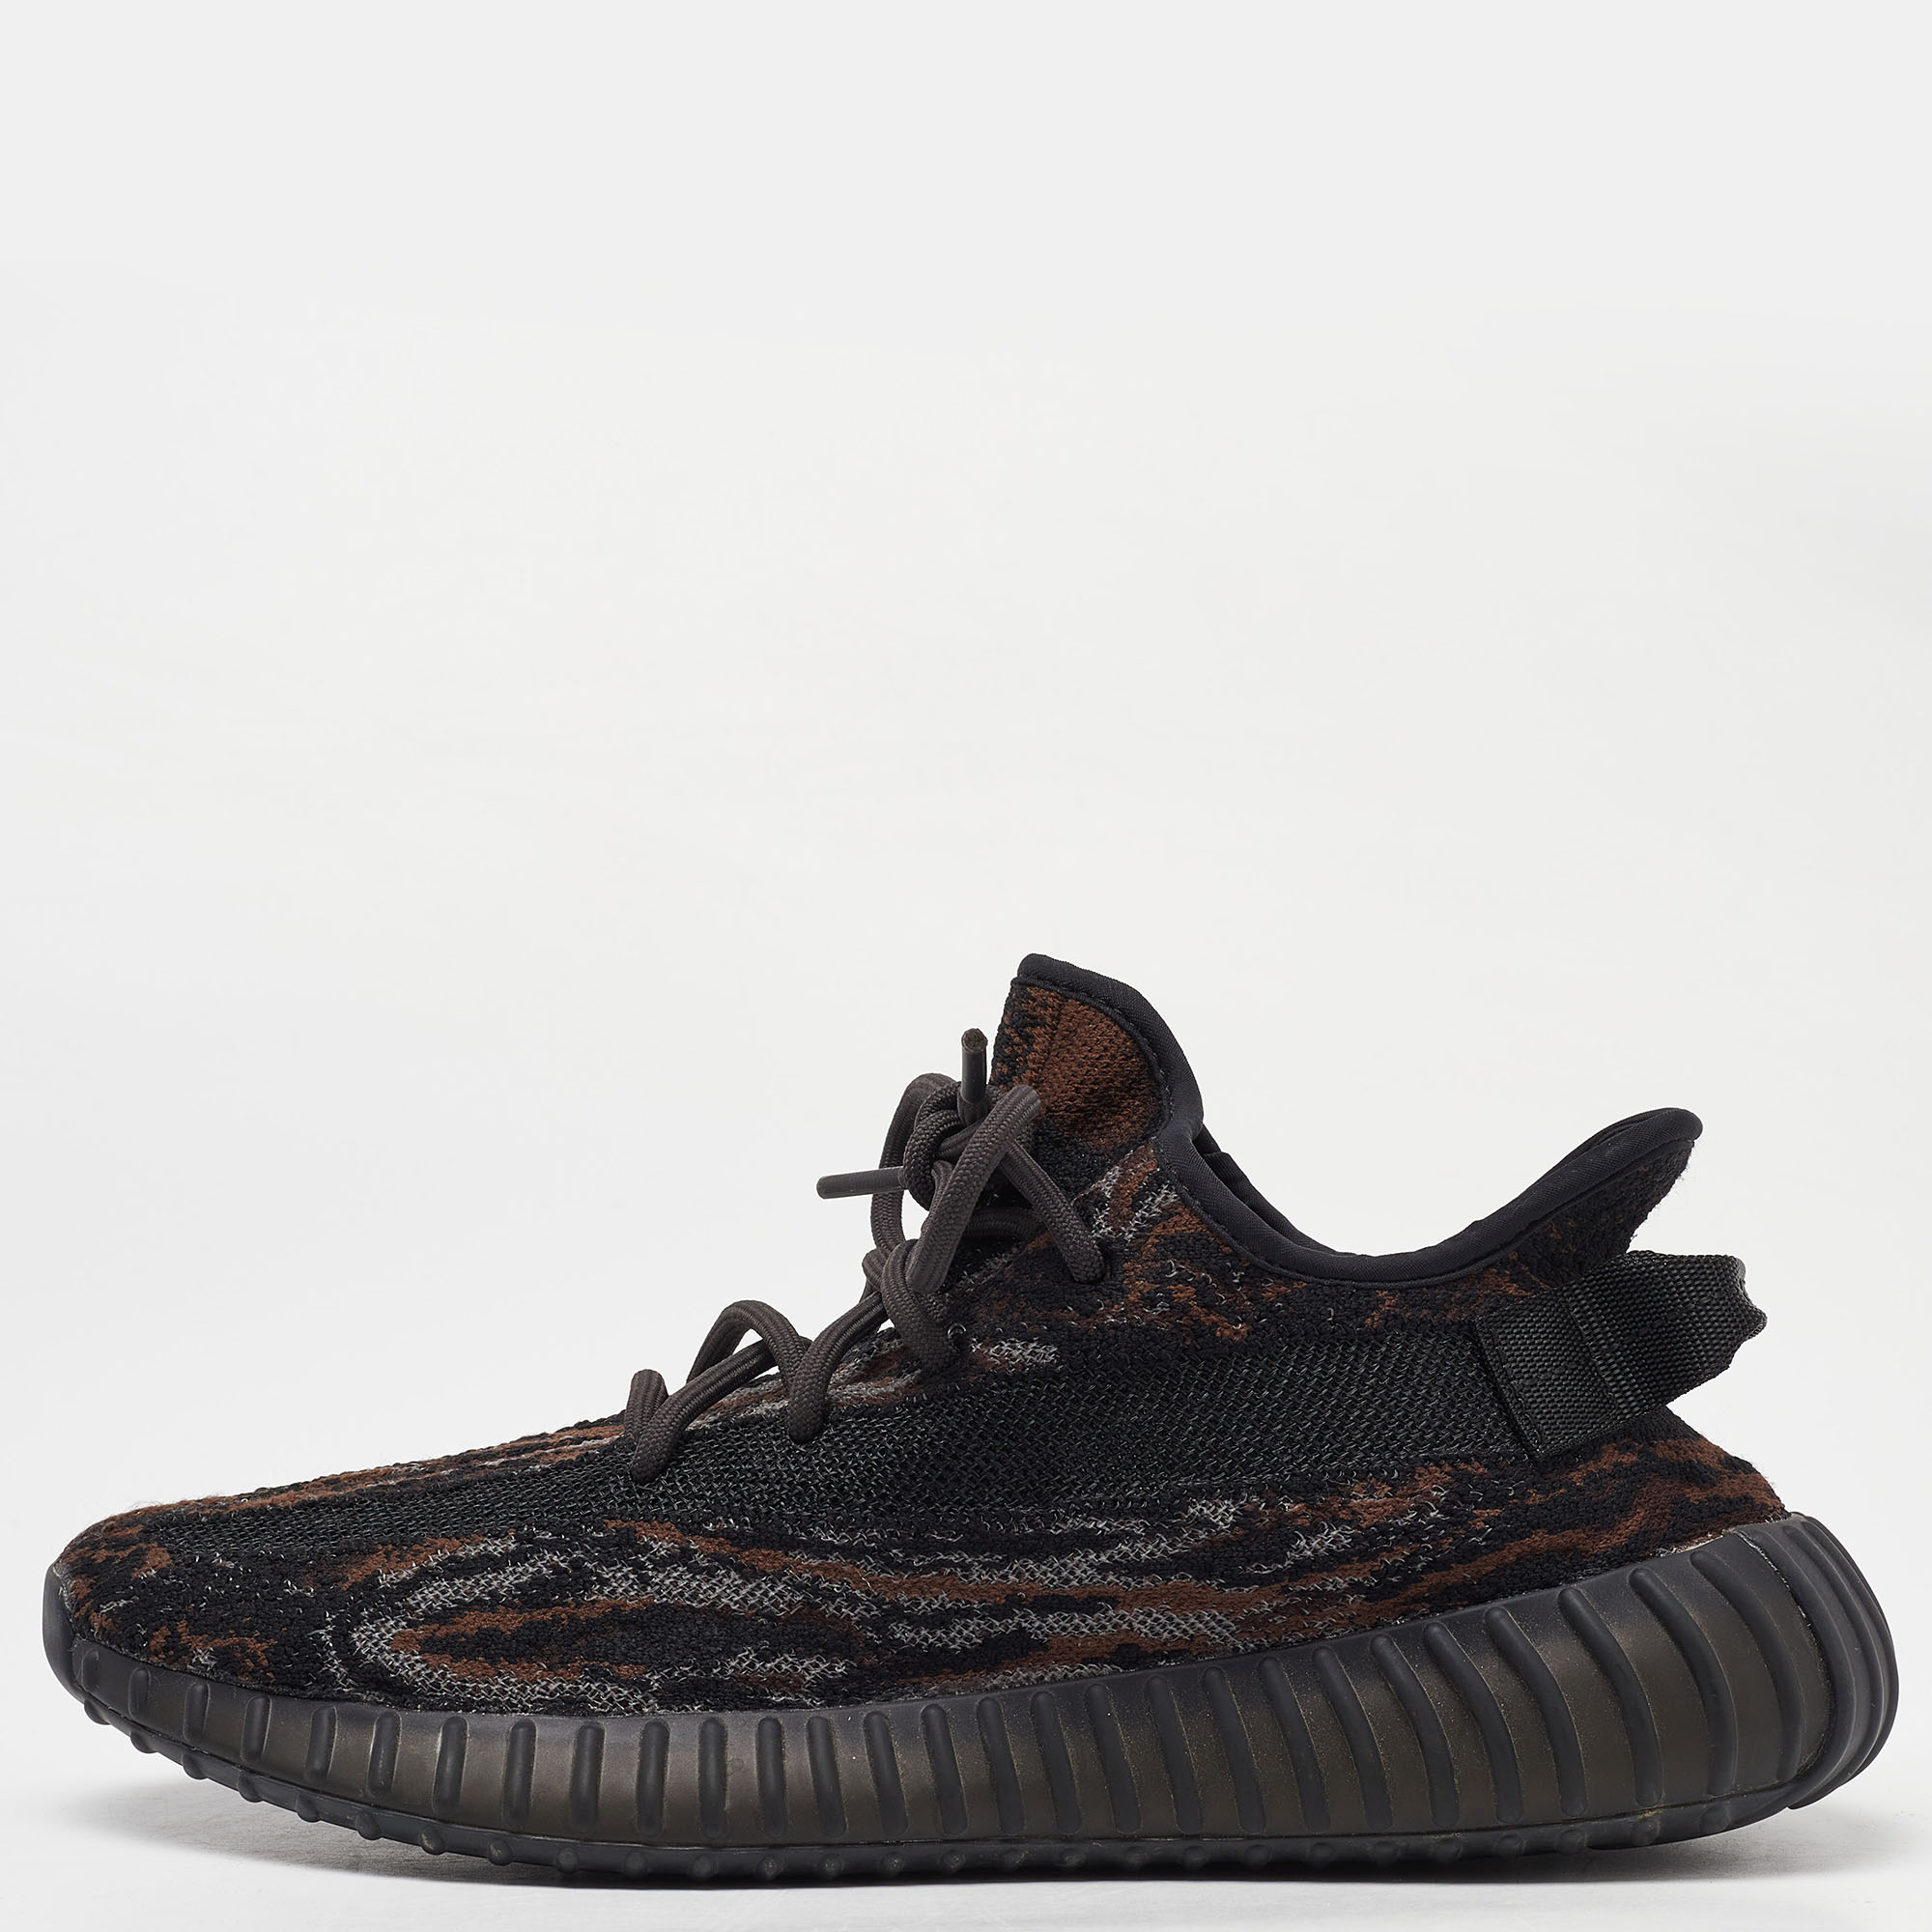 

Yeezy x Adidas Brown/Black Knit Fabric Boost 350 V2 Mx-Oat Sneakers Size, Multicolor